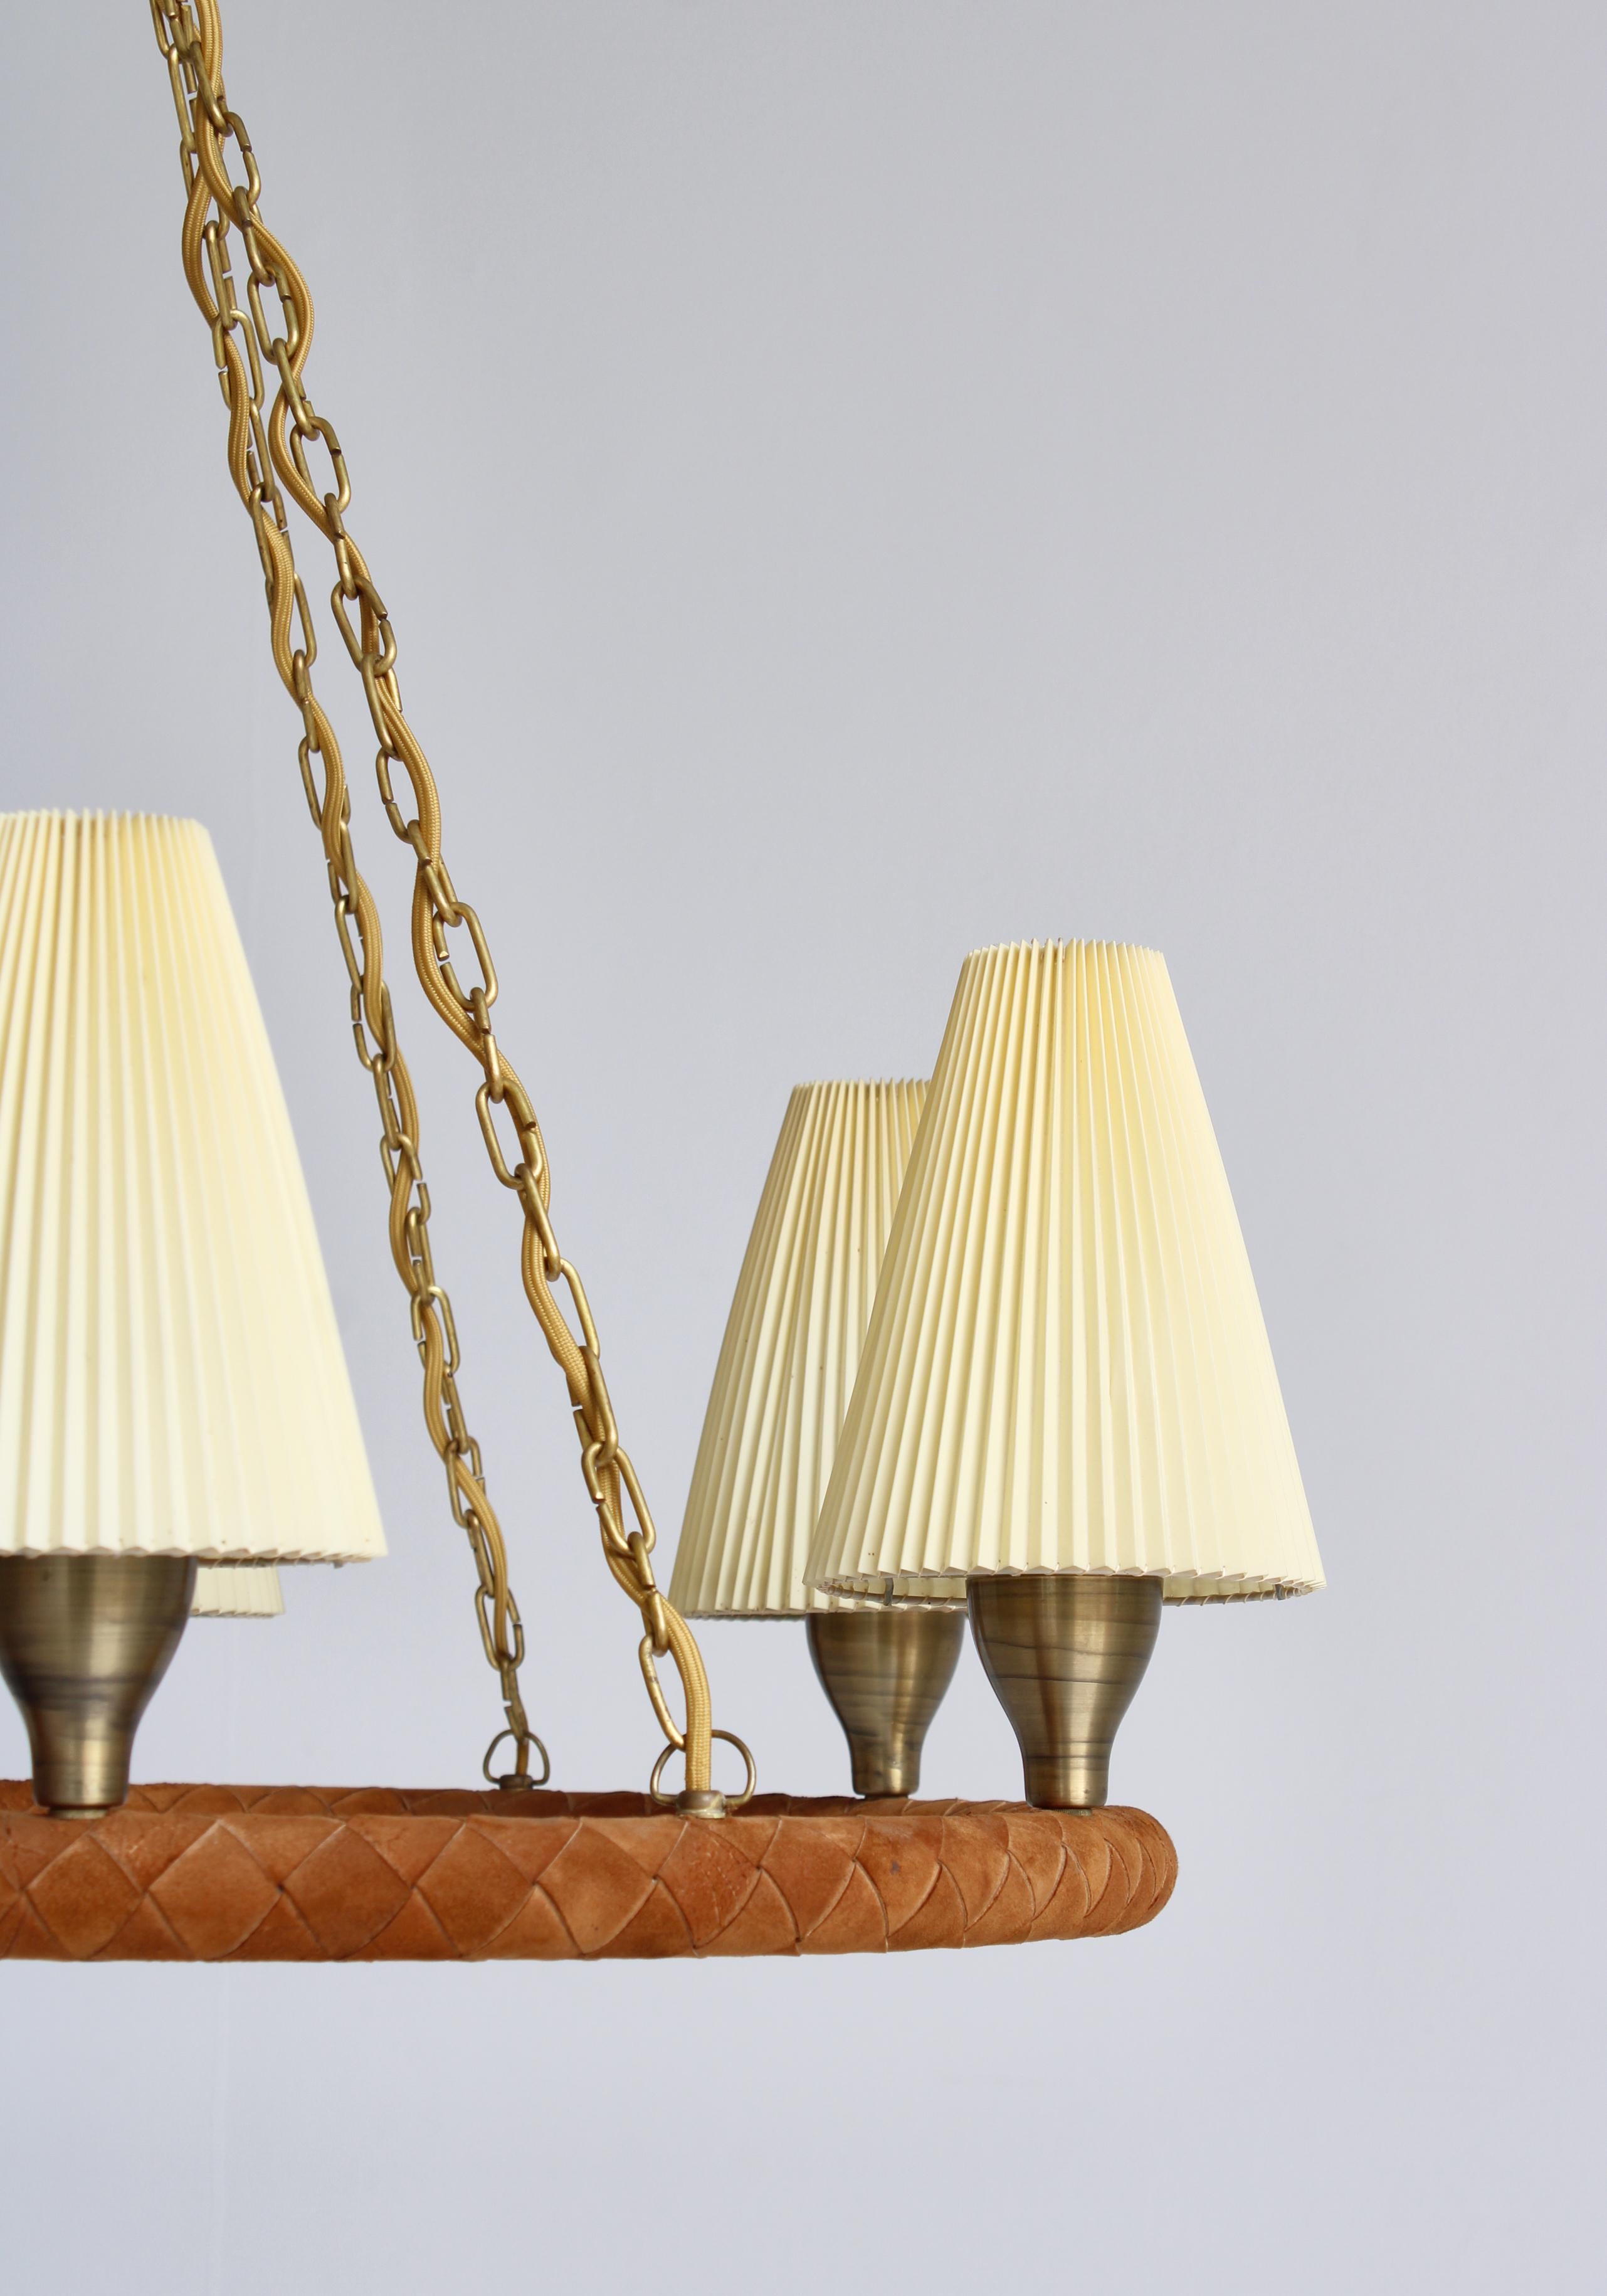 Danish Modern Chandelier in Leather, Brass and Glass by LYFA, Denmark, 1940s For Sale 12